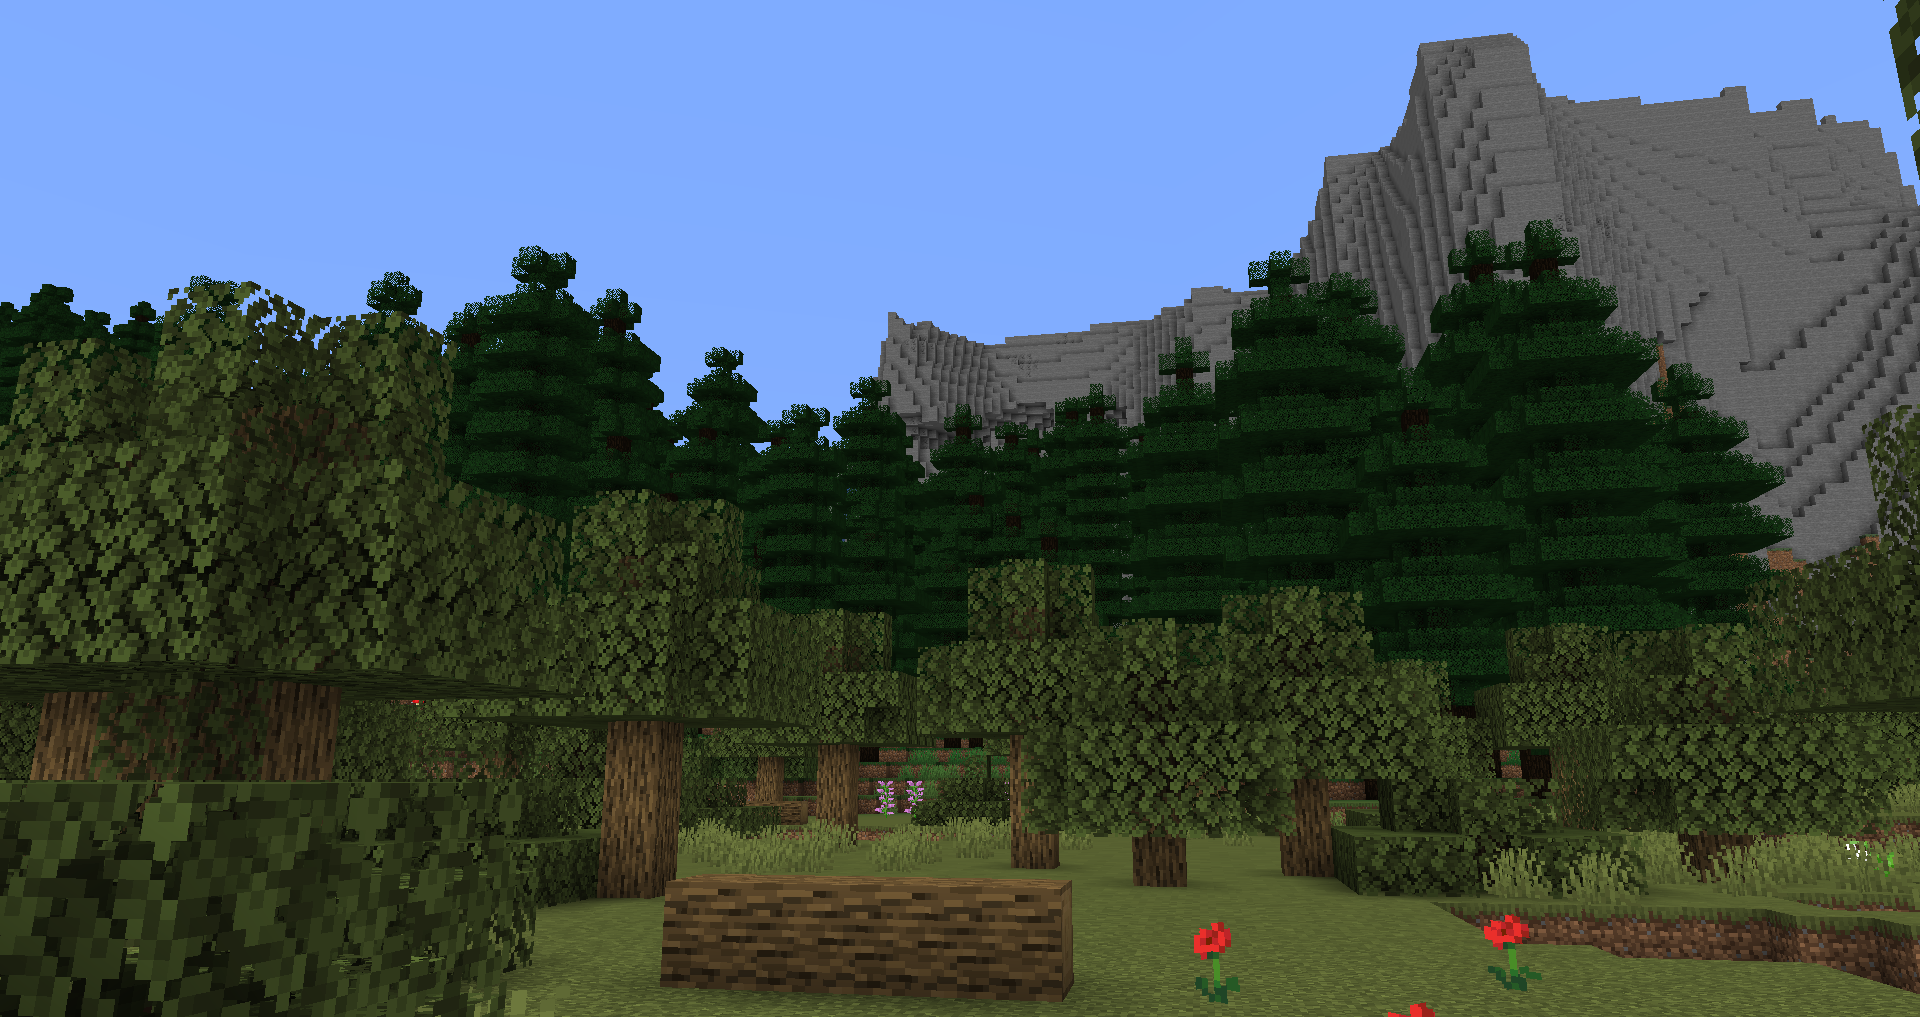 Woodlands, Coniferous Forest, and Cliffs